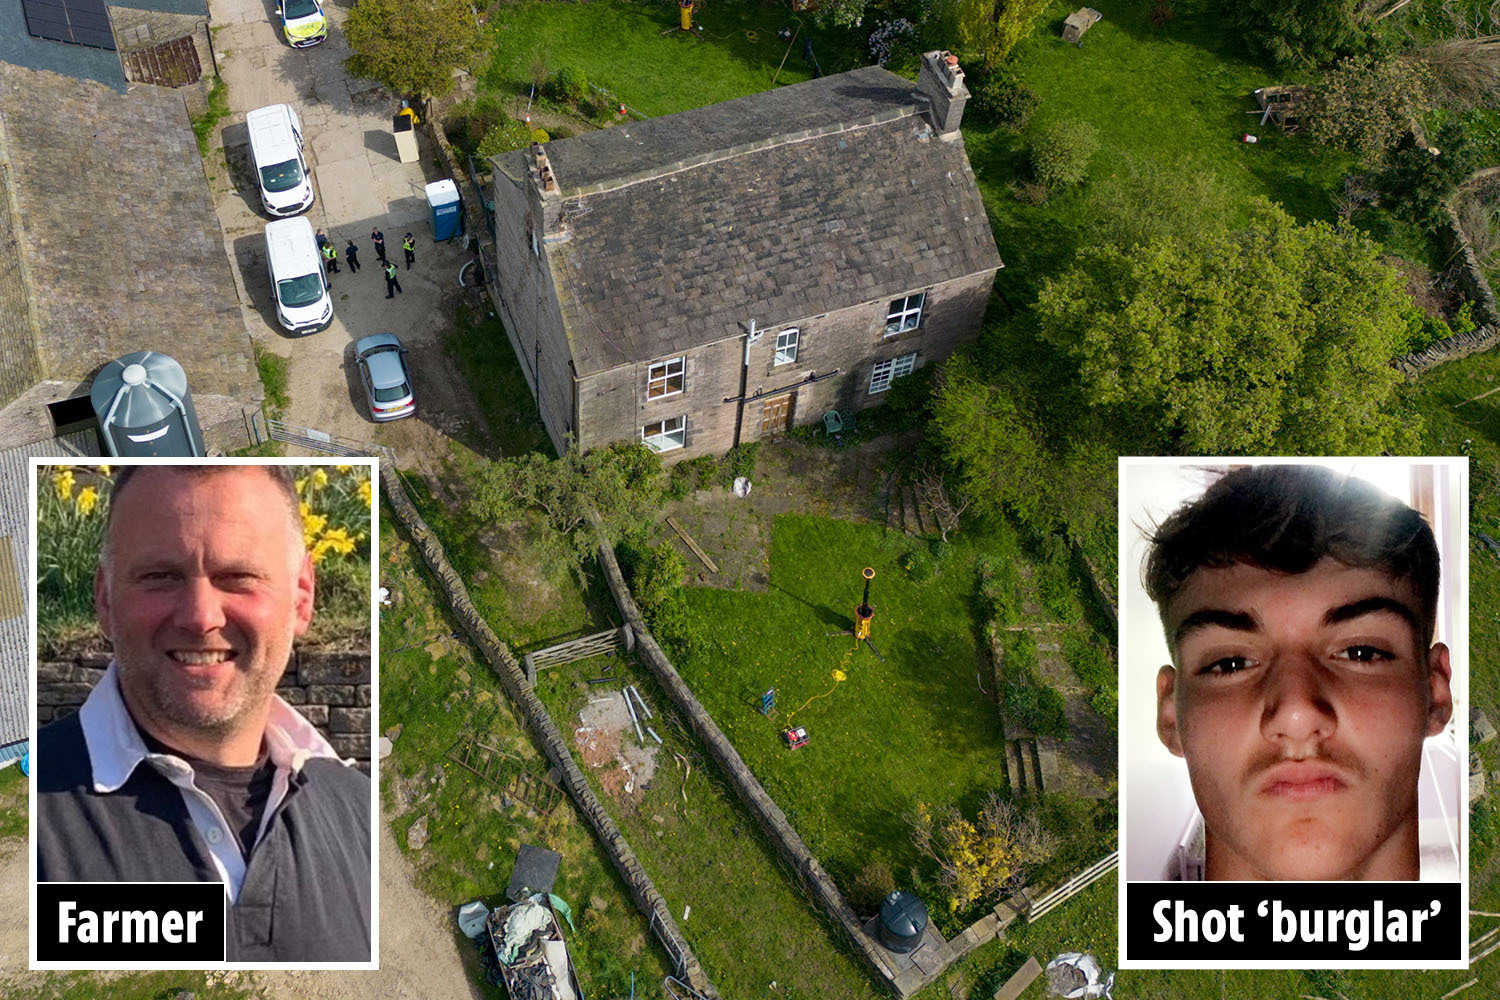 Farmer held for 'shooting burglar dead' reported another raid just hours earlier